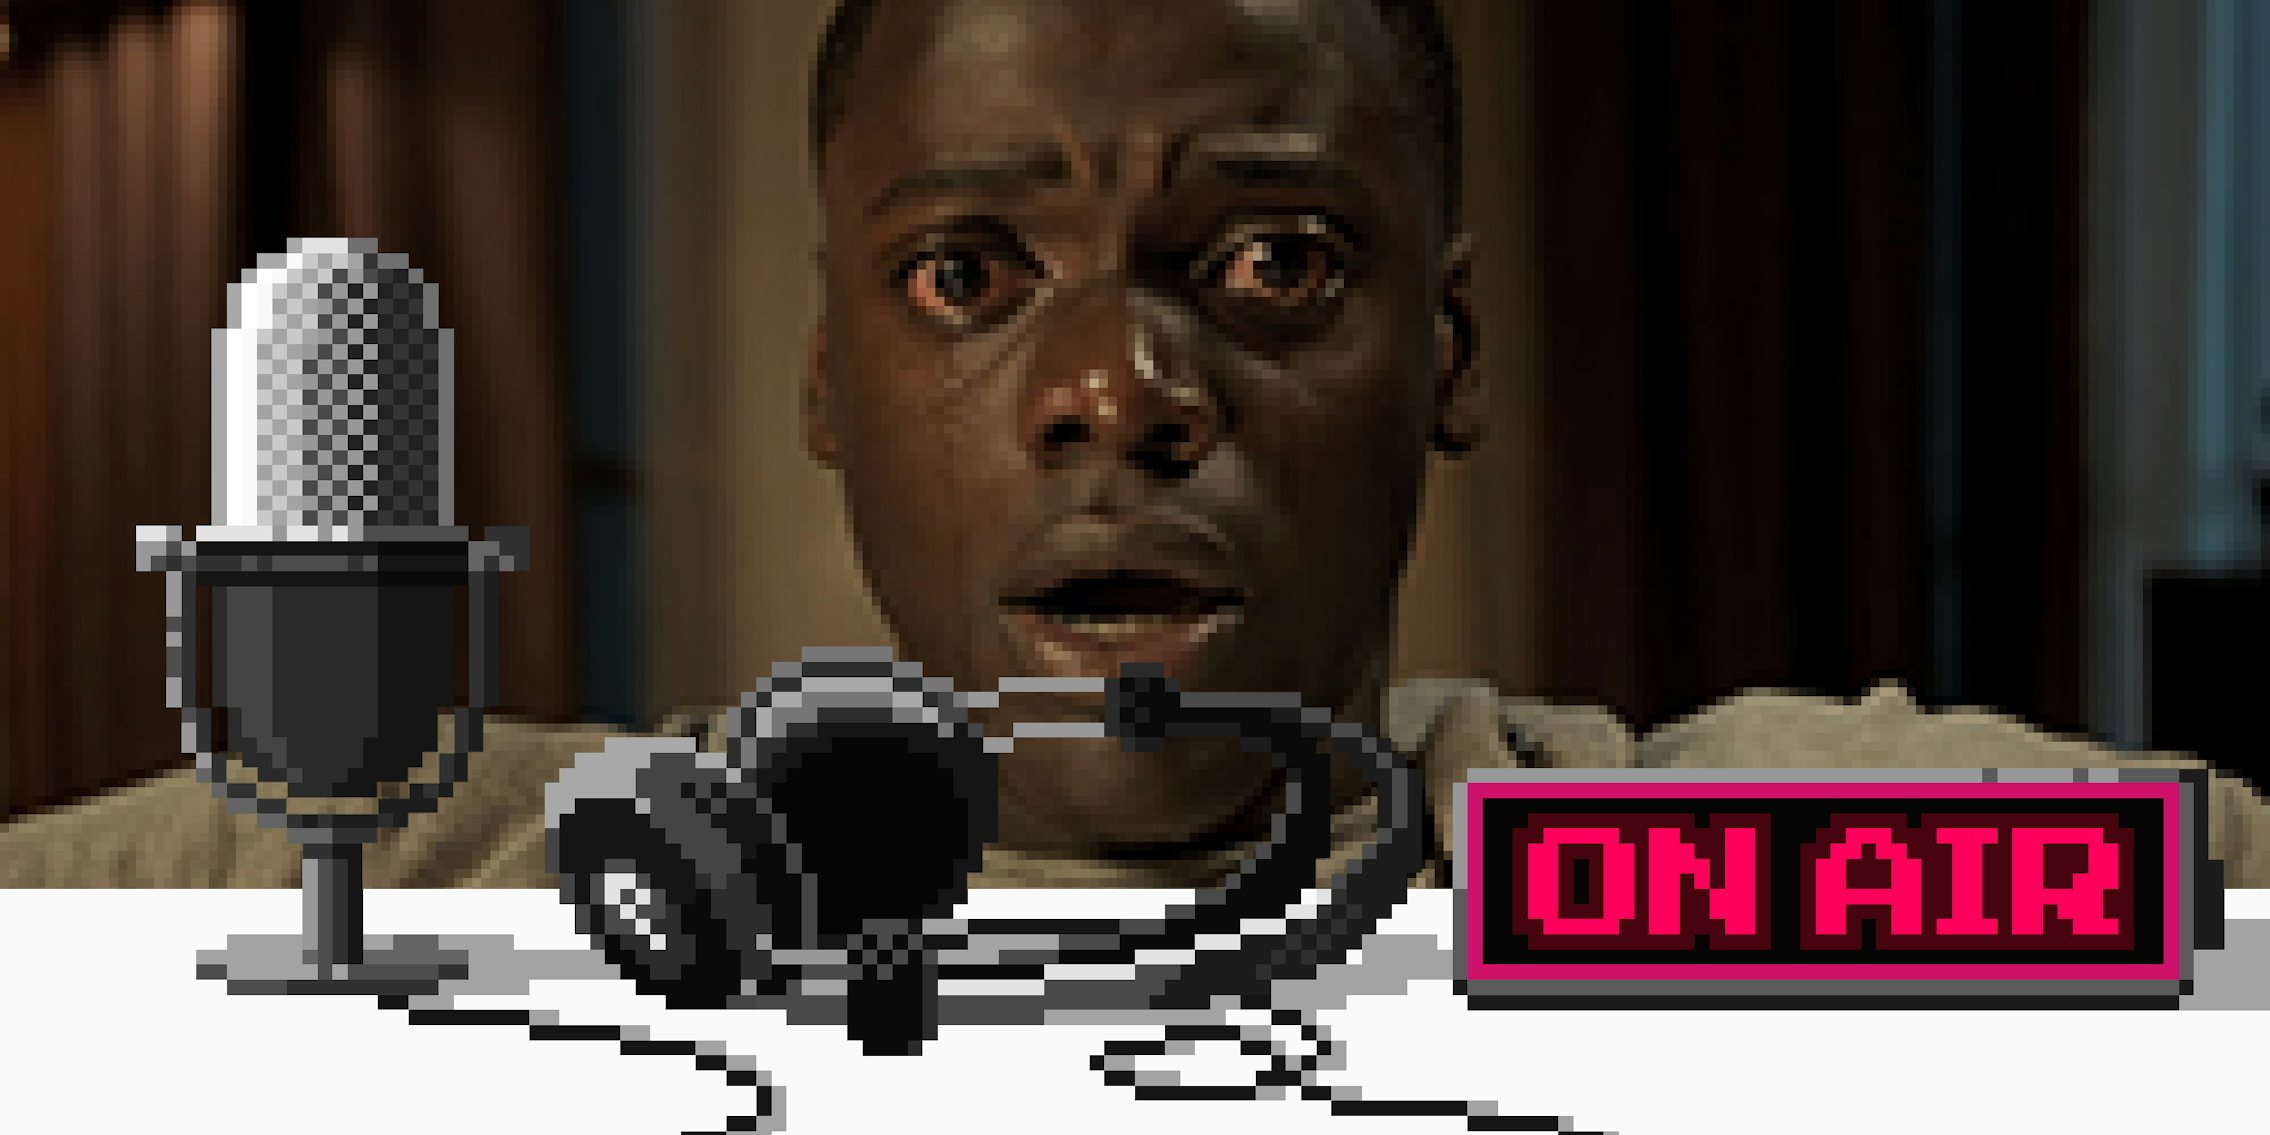 Upstream podcast discusses 'Get Out' movie